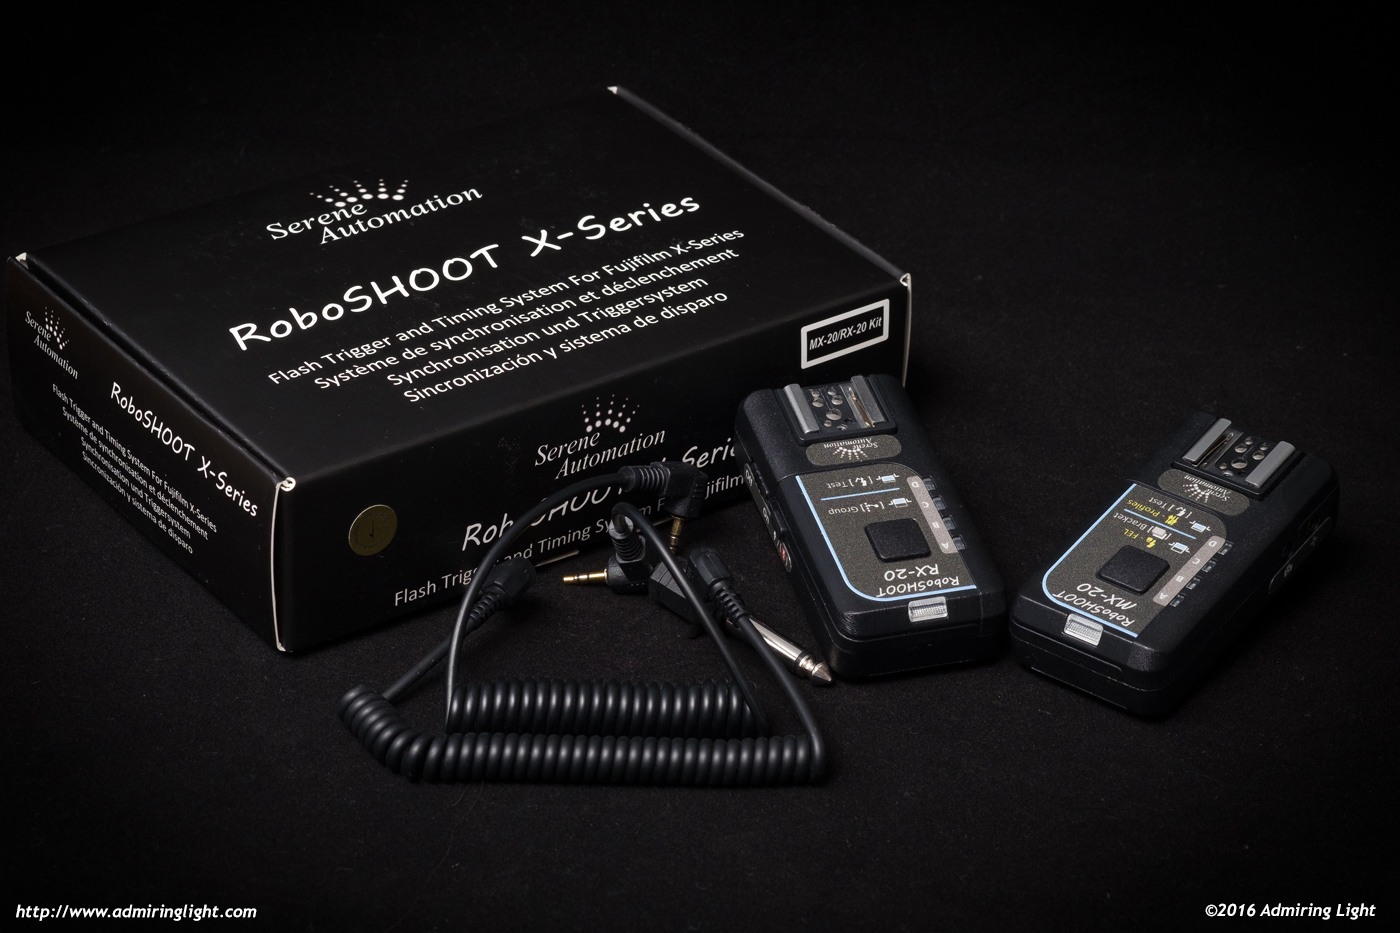 The MX-20 and RX-20 set comes with the receiver, transmitter and a a few cables for sync connections